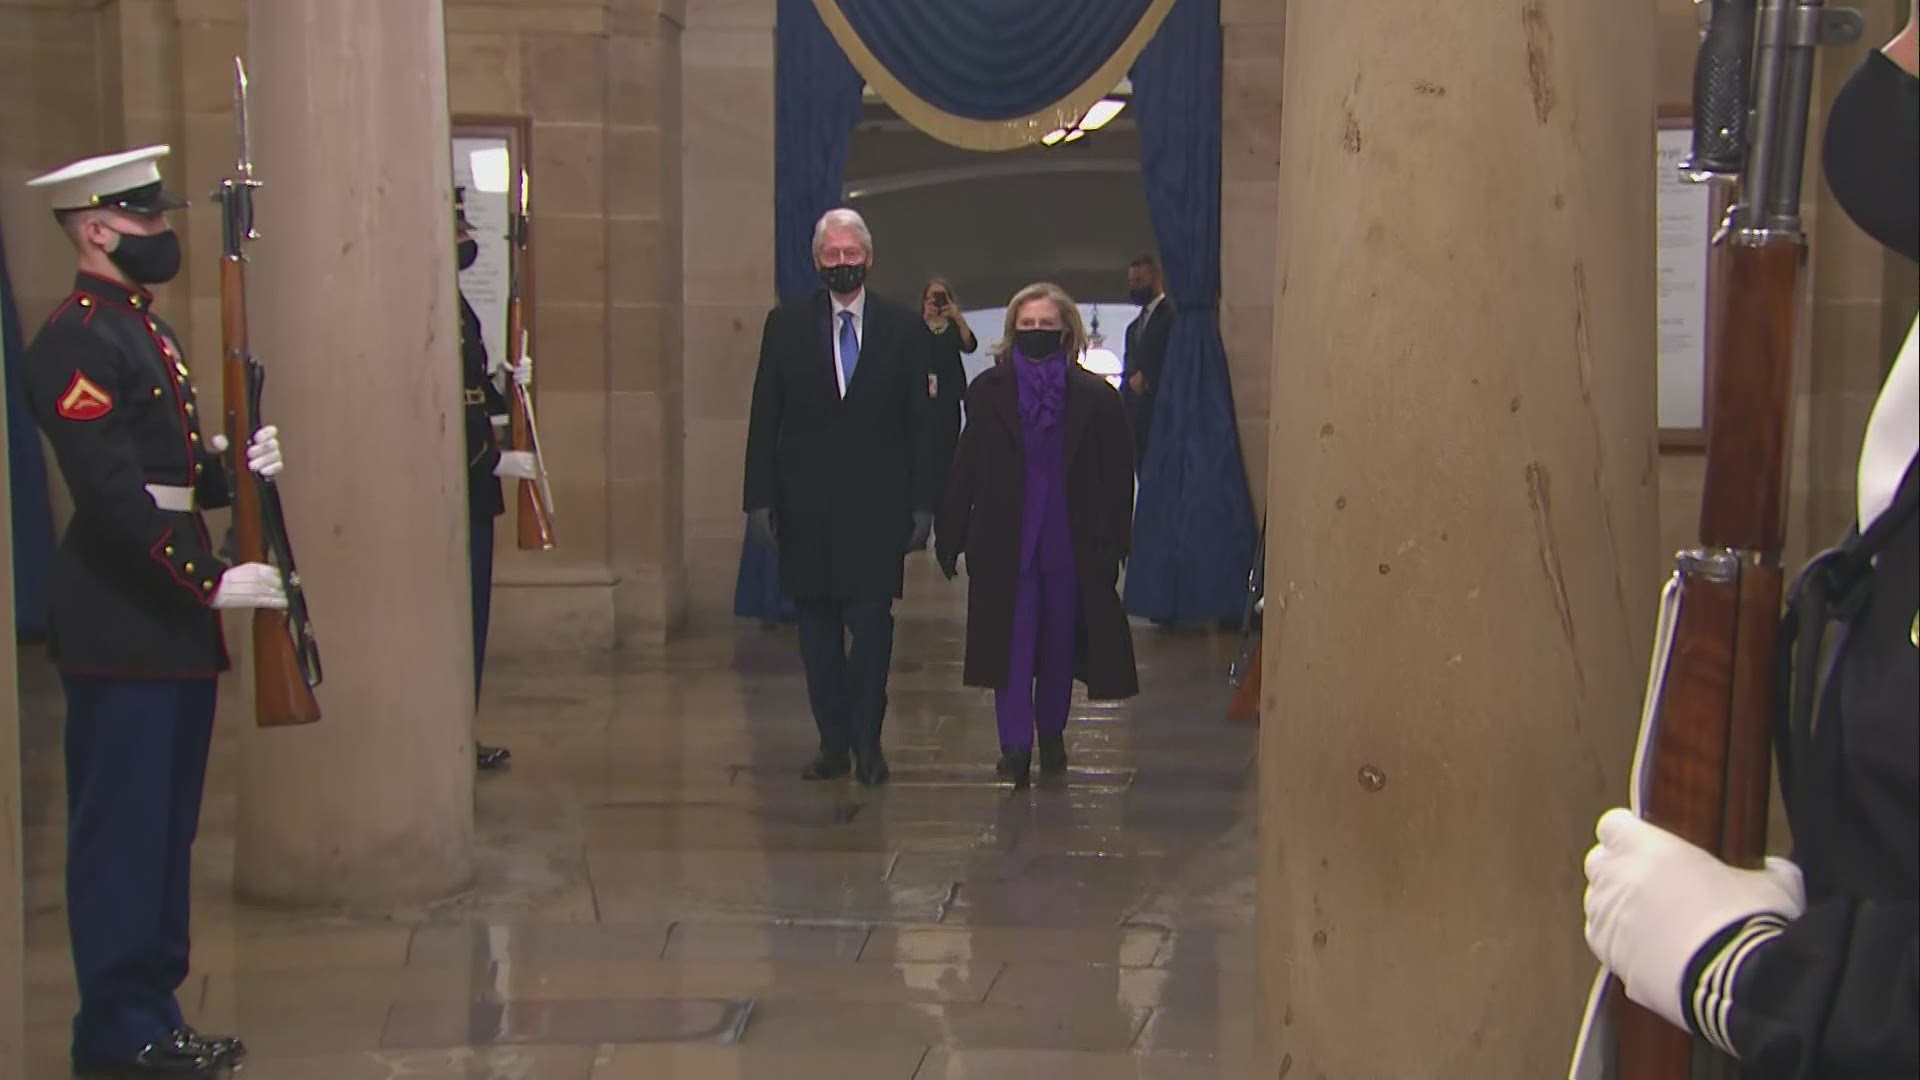 Former presidents and first ladies arrived at the Capitol for inauguration.